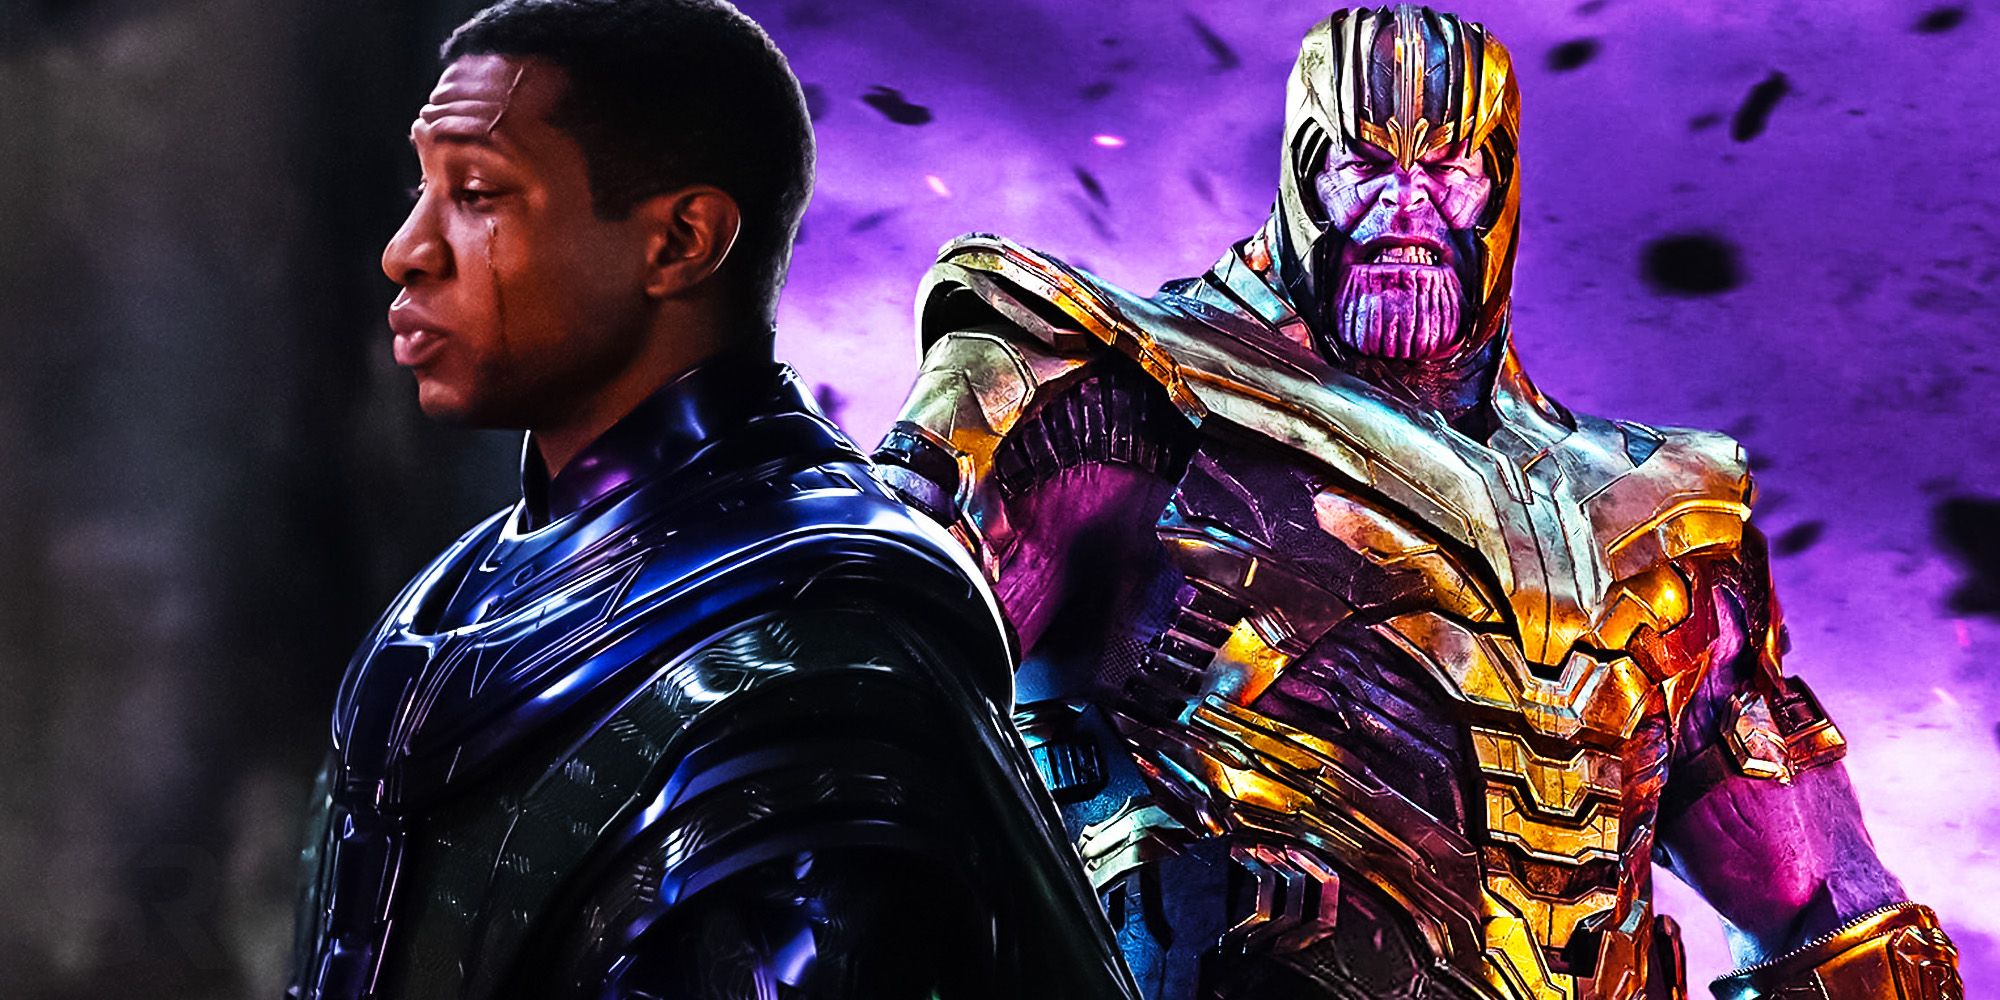 Split Image: Kang the Conqueror (Jonathan Majors) stares at Scott Lang (off-screen); Thanos (Josh Brolin) grits his teeth while fully clad in his armor, ready for battle